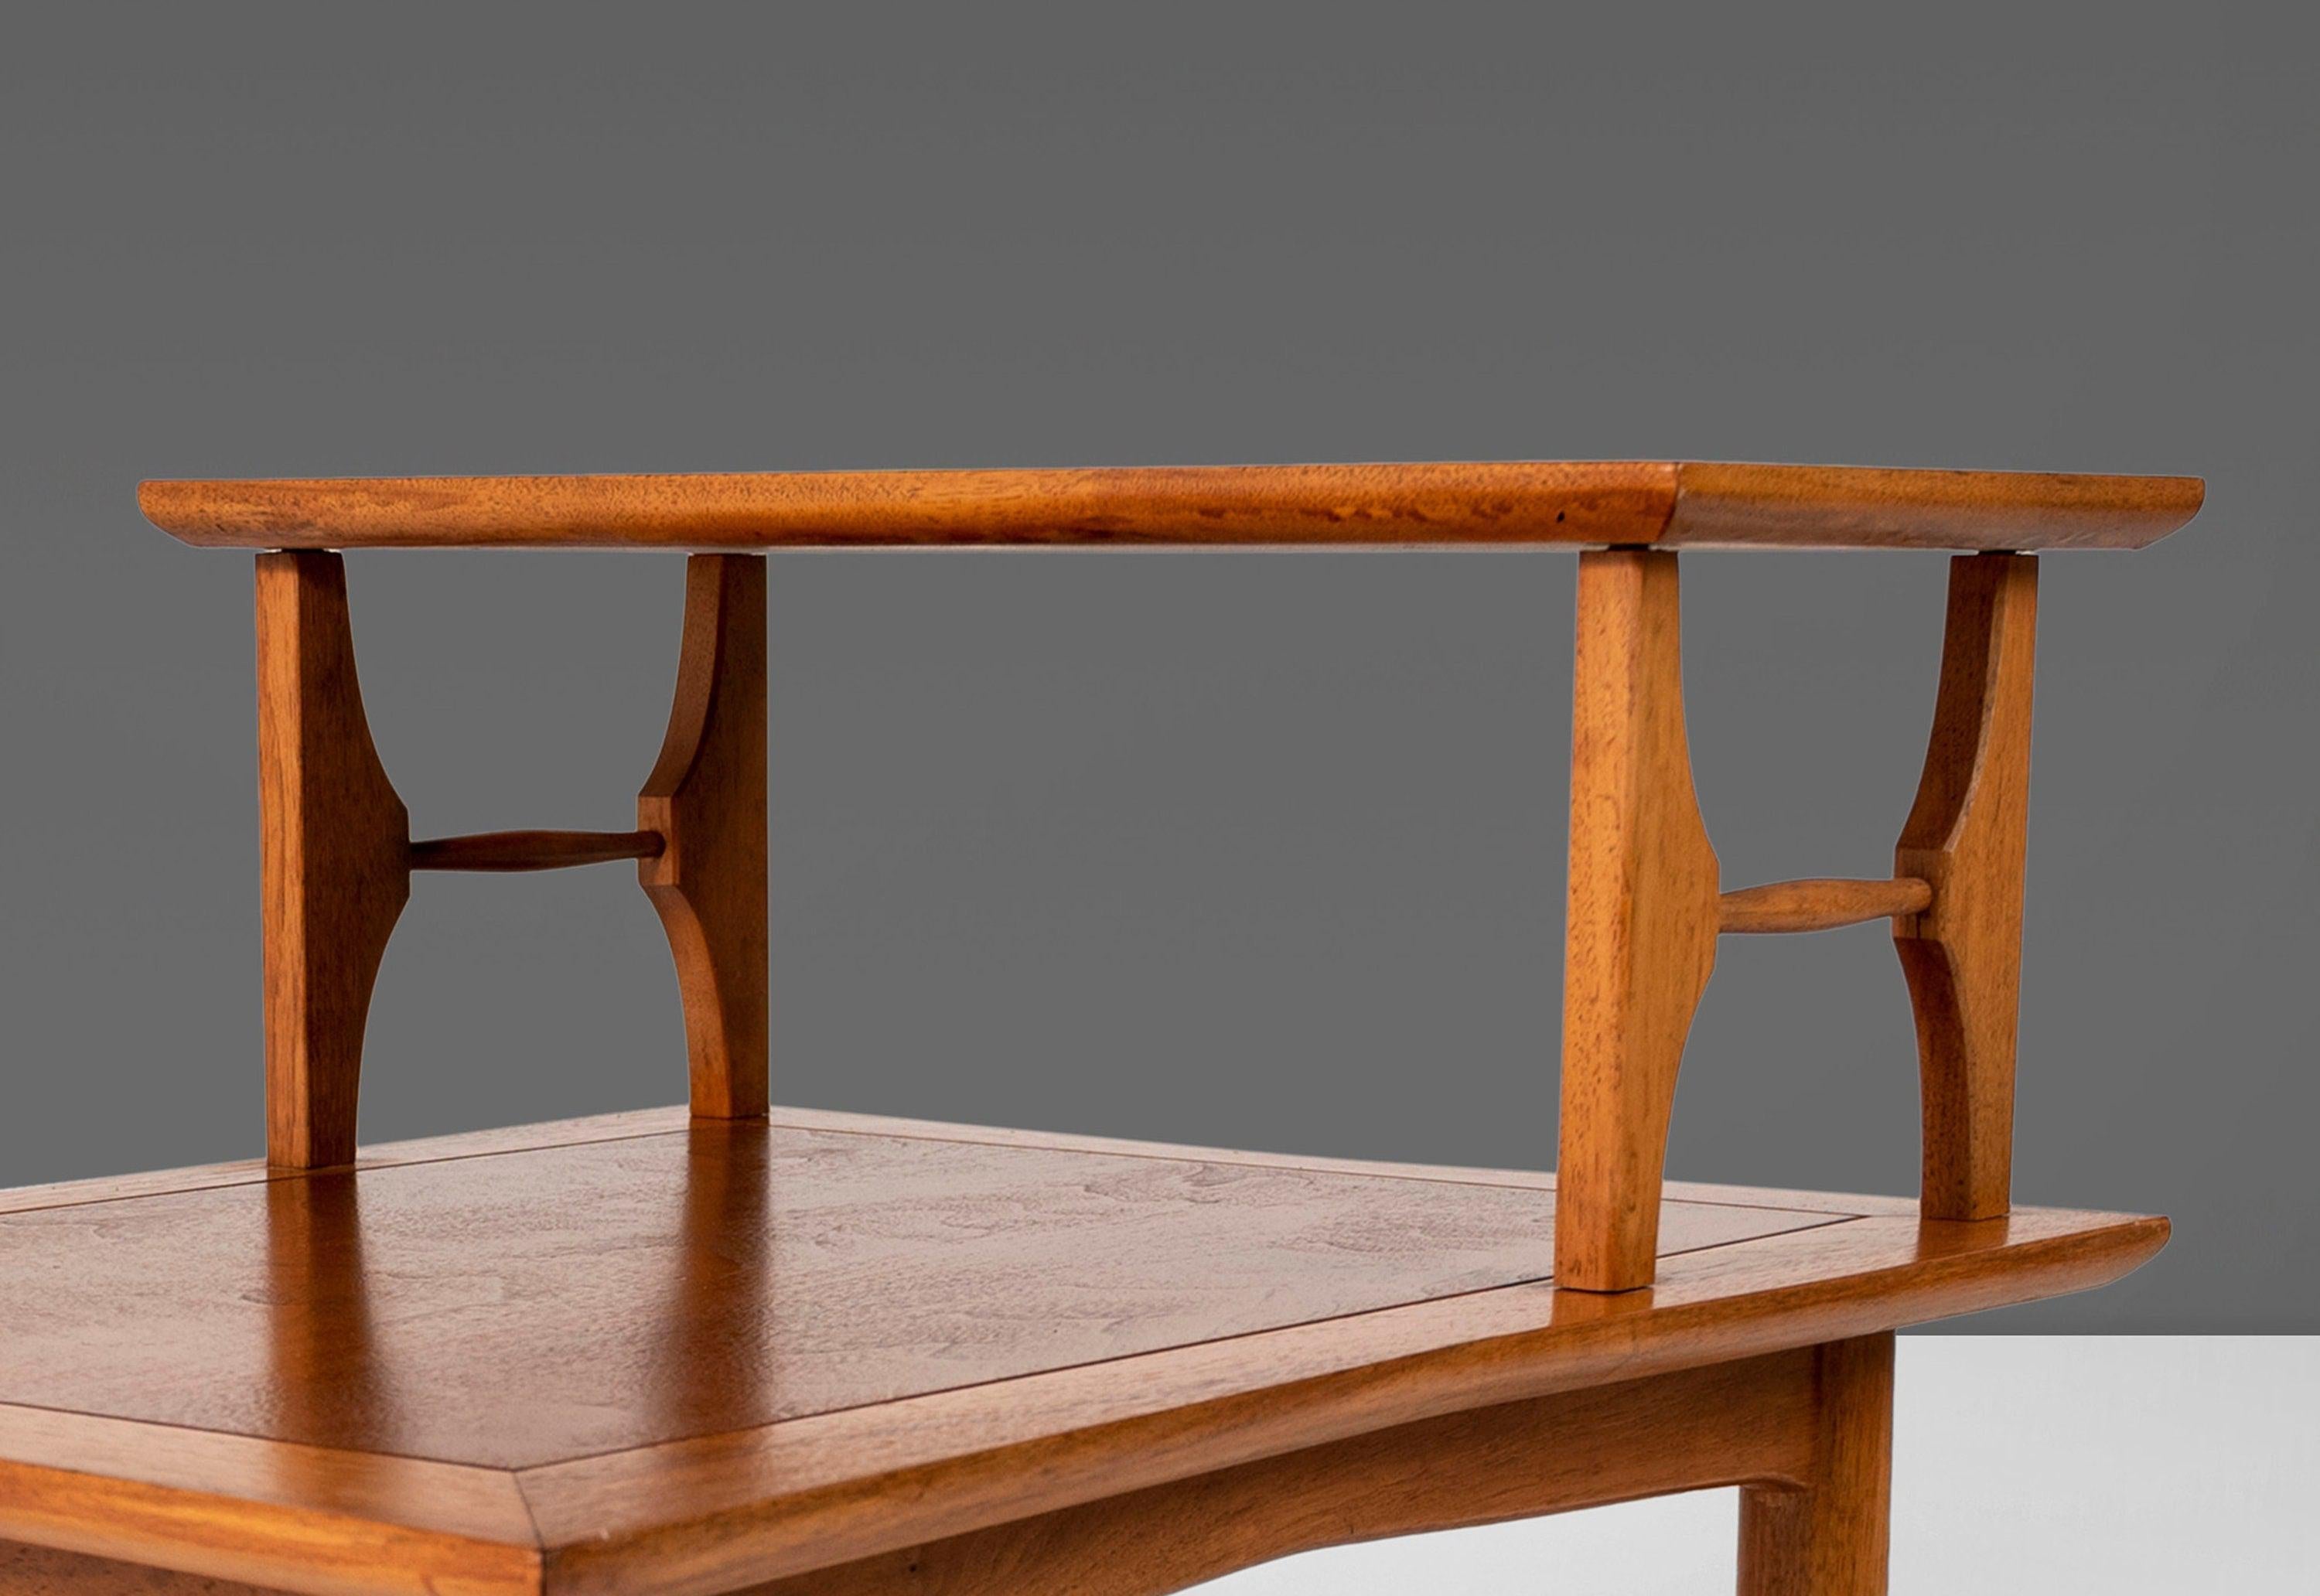 Pair of 2-Tier Mid-Century Modern End Tables Attributed to Lubberts & Mulder For Sale 3